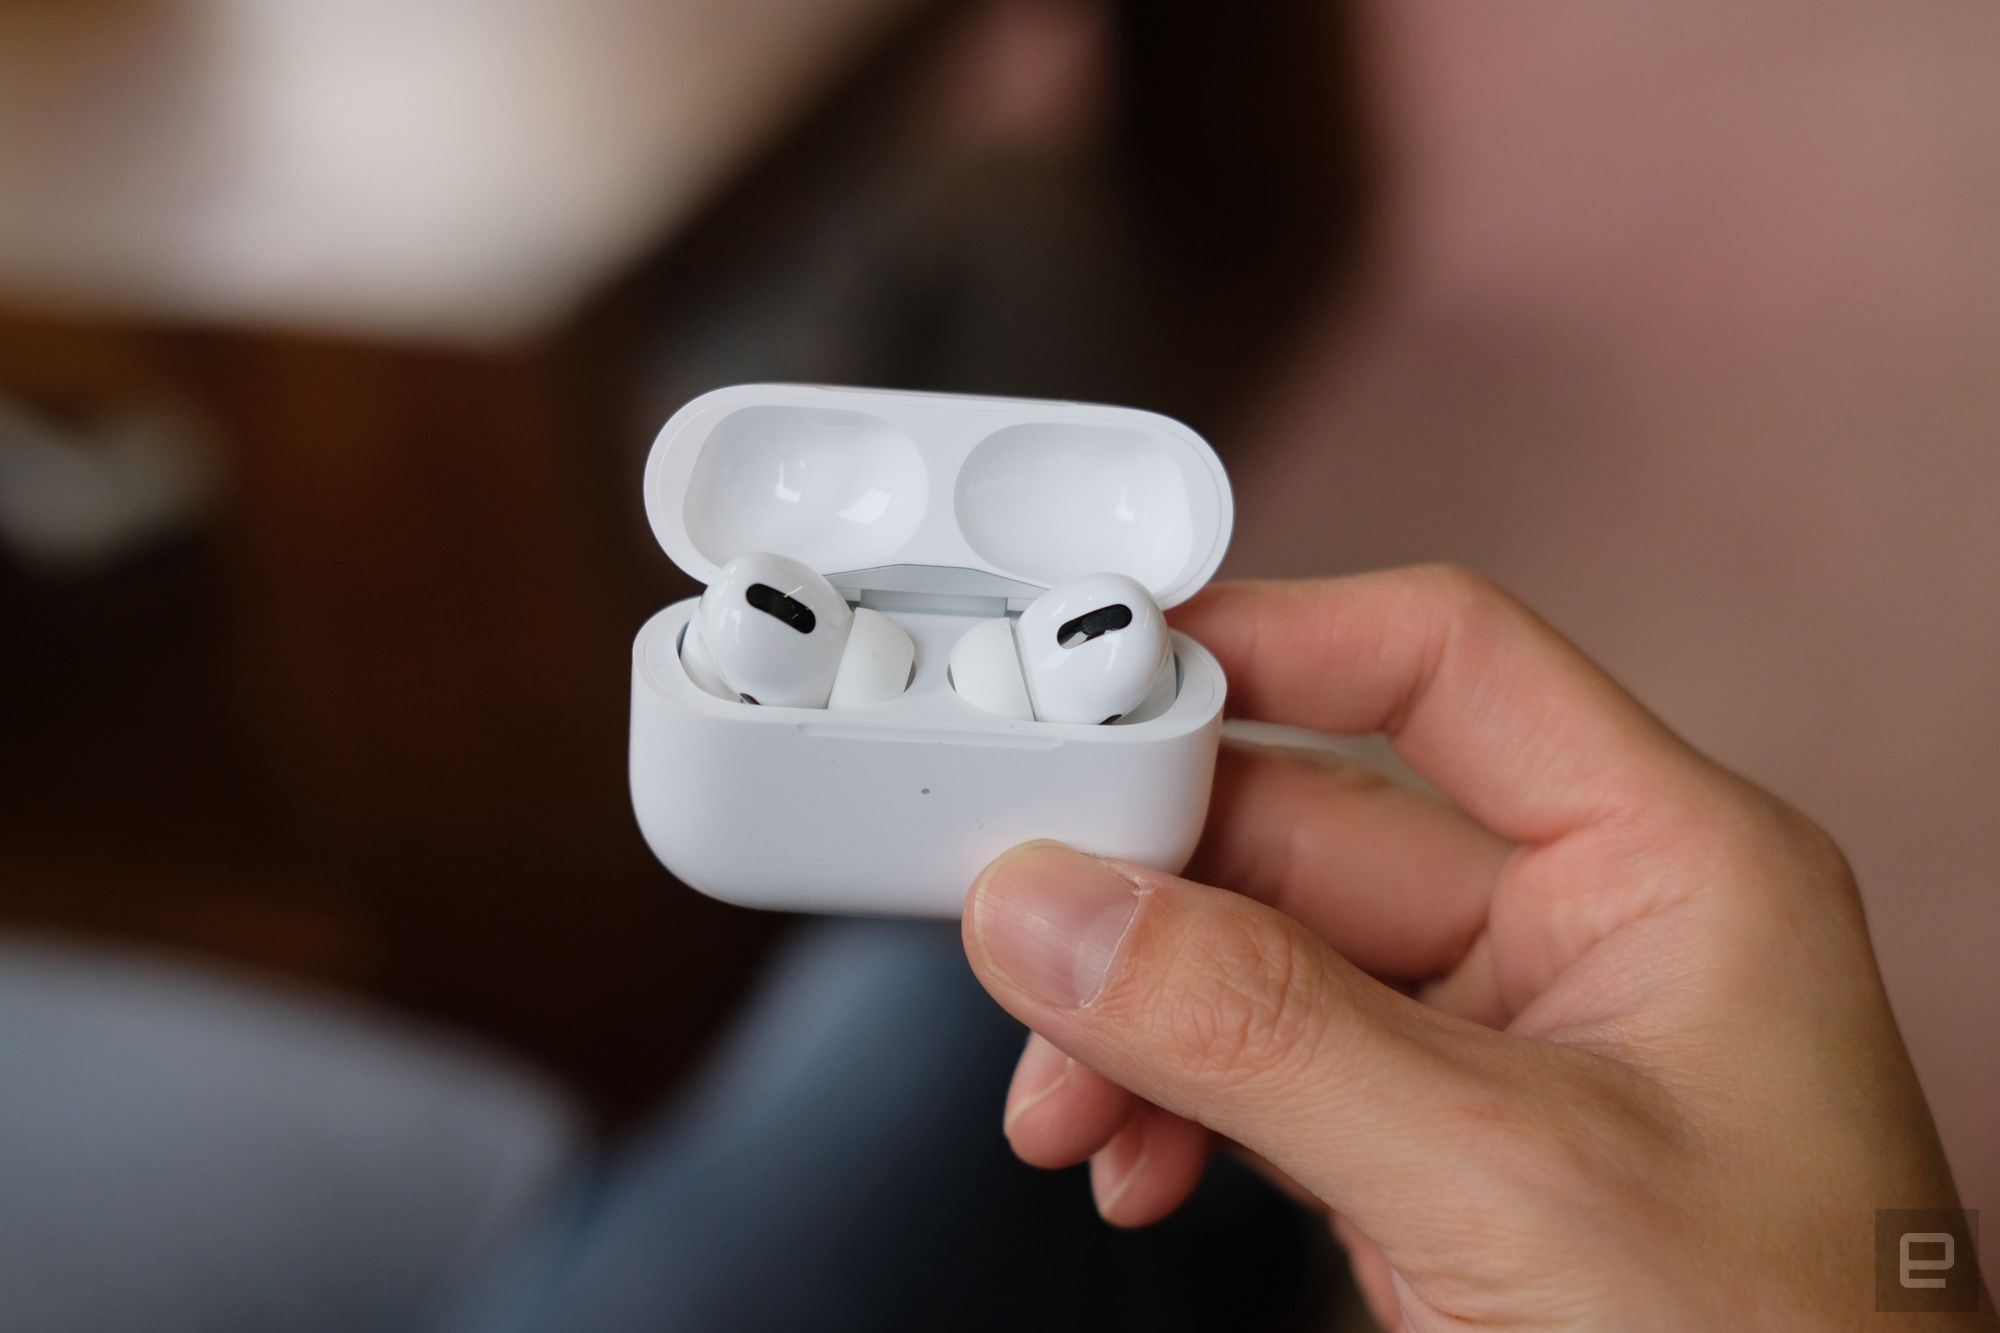 Hot: Apple offers a global warranty for AirPods Pro, after the warranty expires, they can still be exchanged for free - Photo 1.